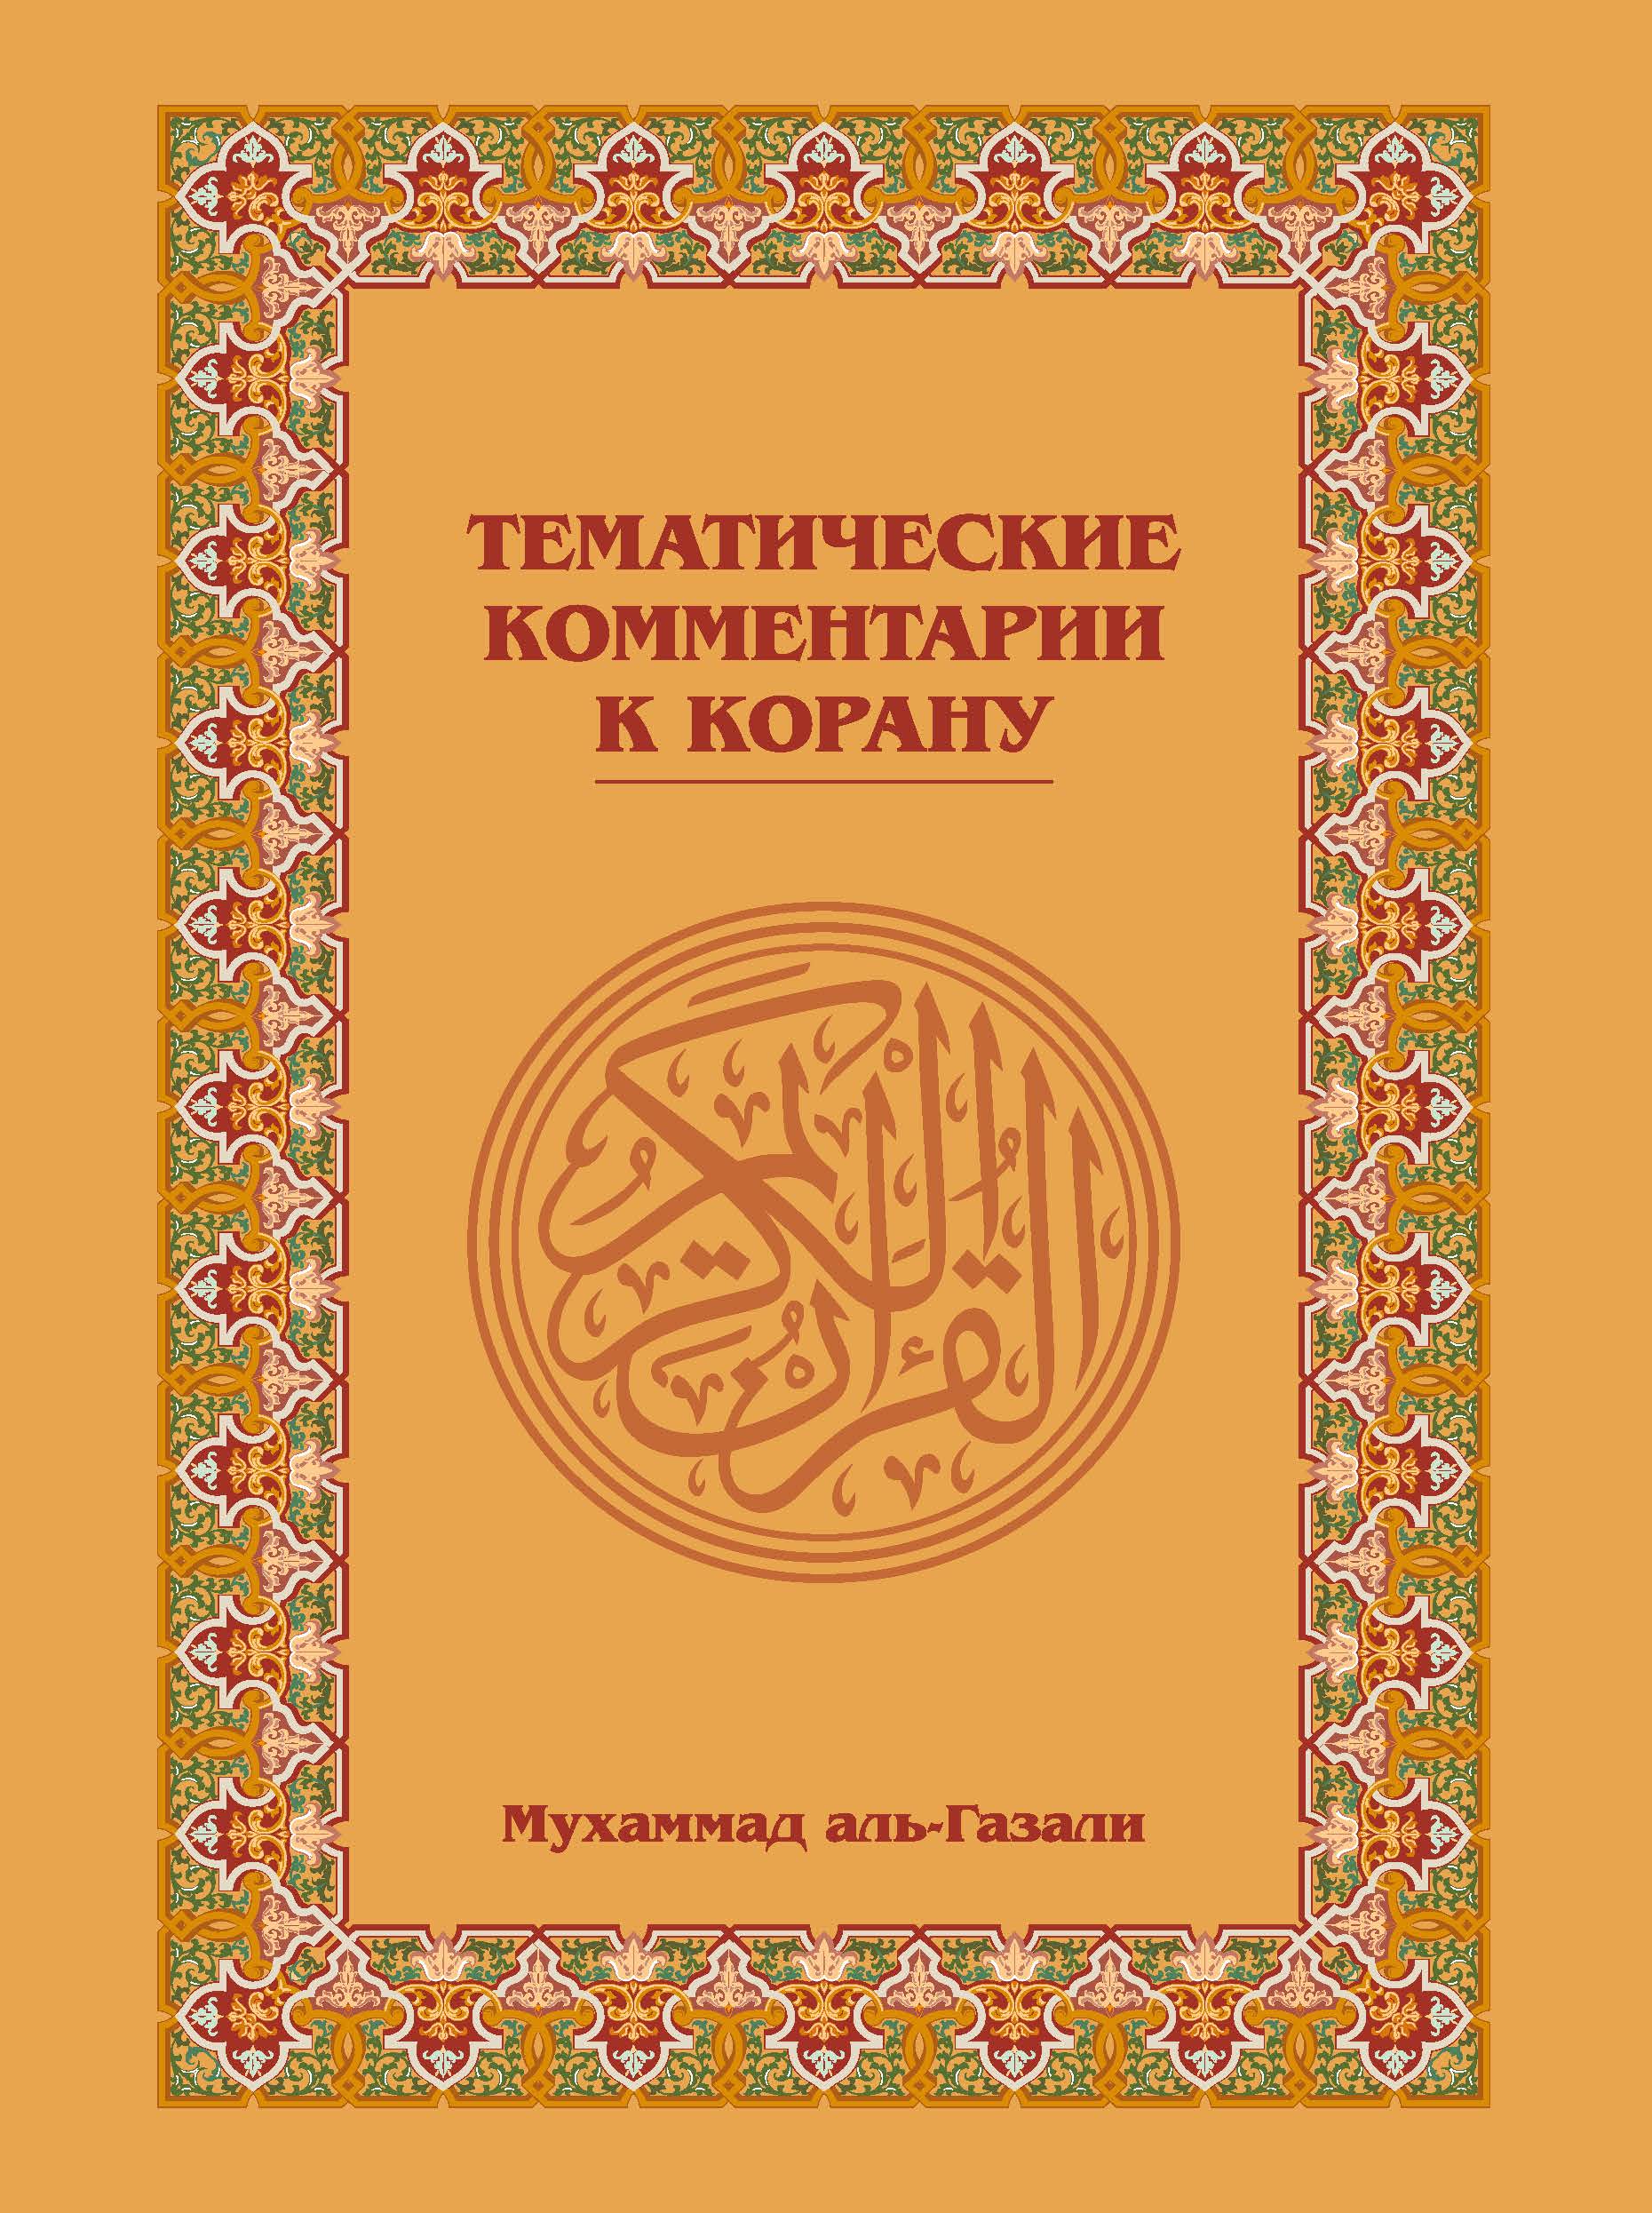 (Russian Language) Тематические комментарии к Корану (A Thematic Commentary on The Qur’an)